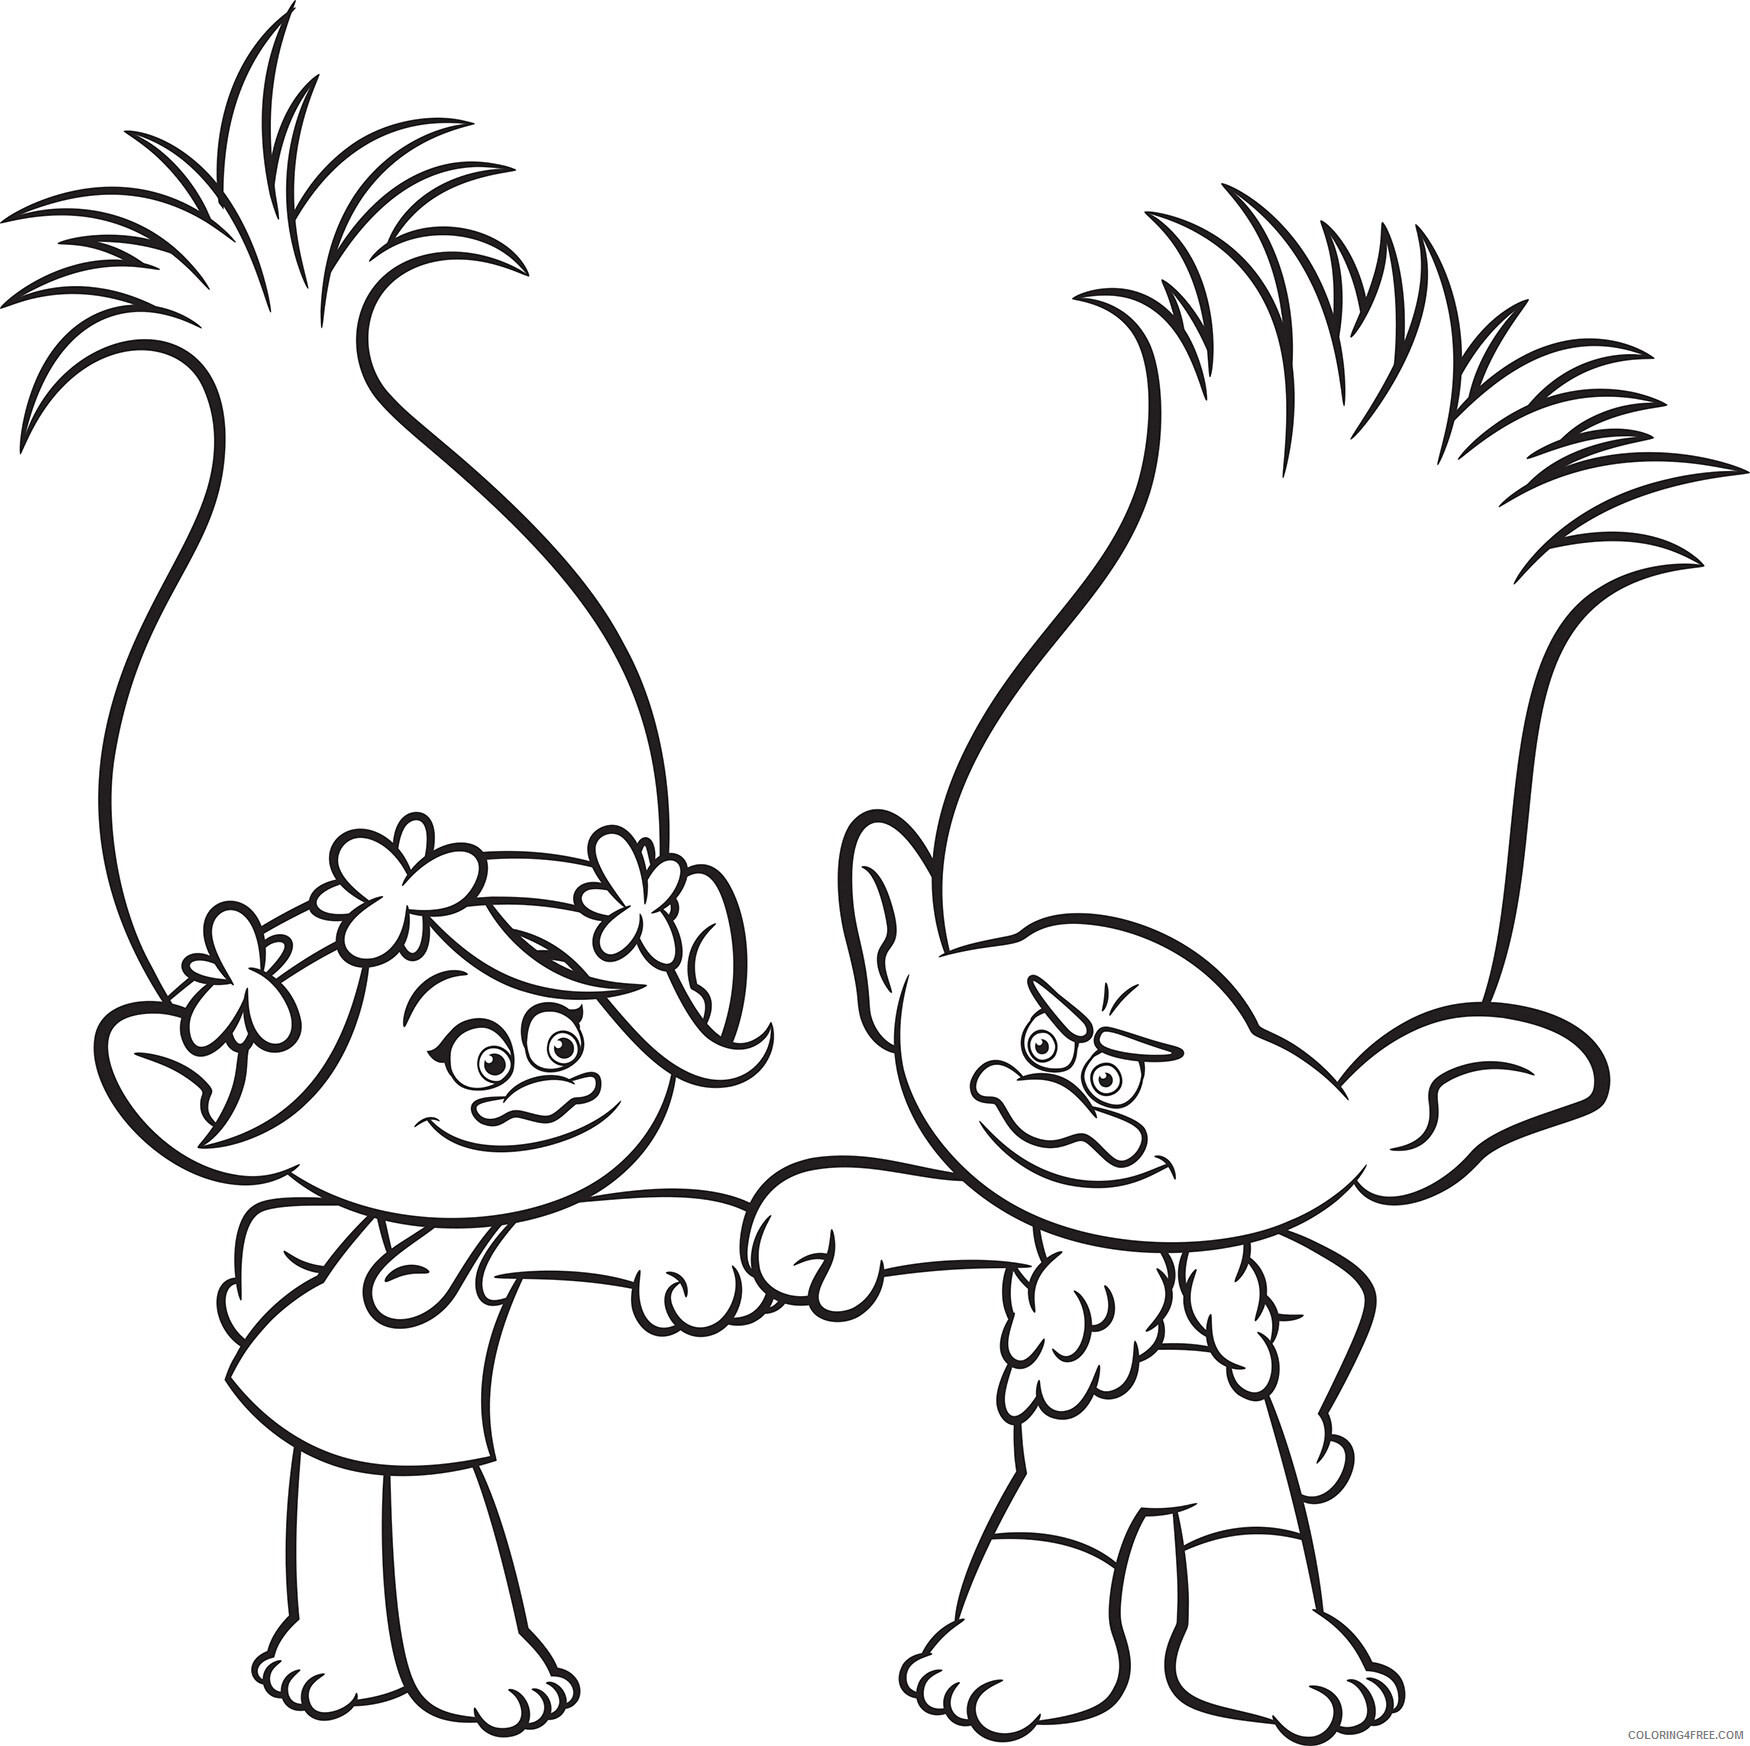 Trolls Coloring Pages TV Film Free Trolls Movie to Download Printable 2020 10804 Coloring4free